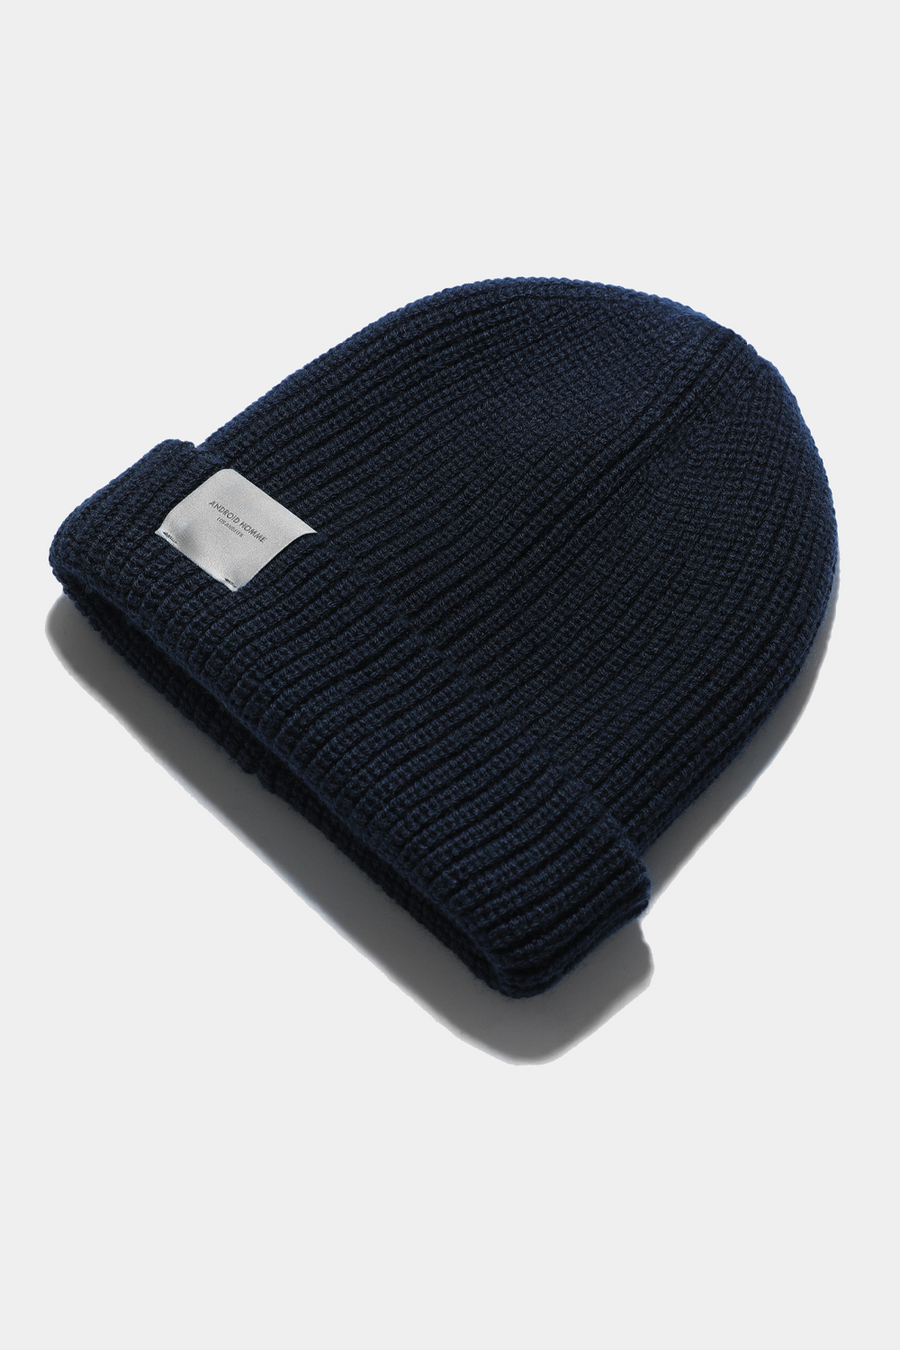 Buy the Android Homme Core Beanie Navy at Intro. Spend £50 for free UK delivery. Official stockists. We ship worldwide.